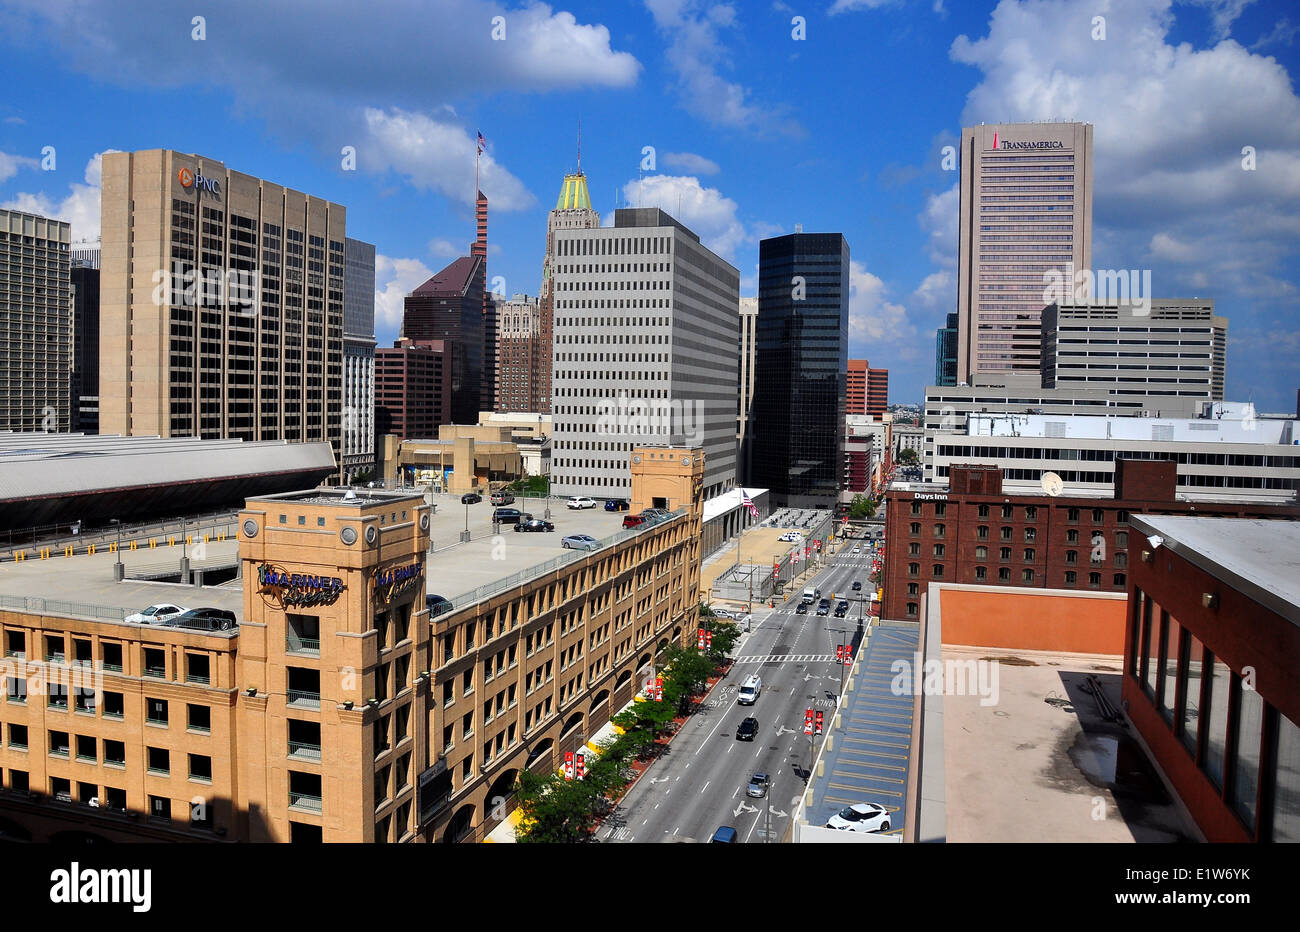 Baltimore, MD: View of corporate office towers, hotels, and modern buildings lining busy Pratt Street Stock Photo